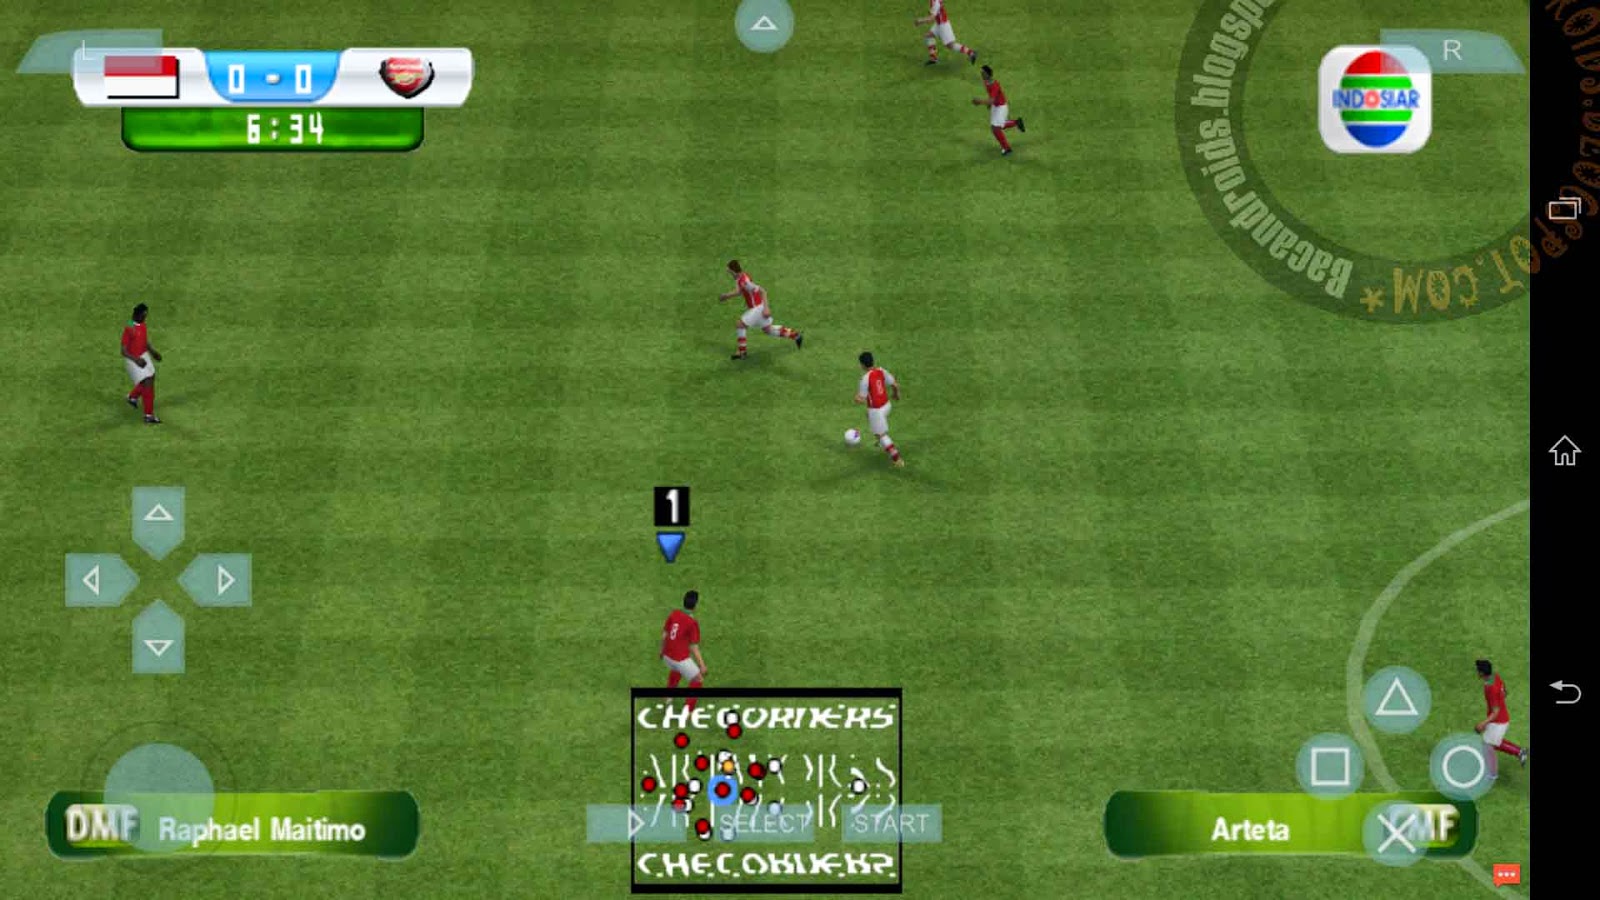 Download Pes 2017 Iso Pes 17 Iso Ppsspp Files For Android ...